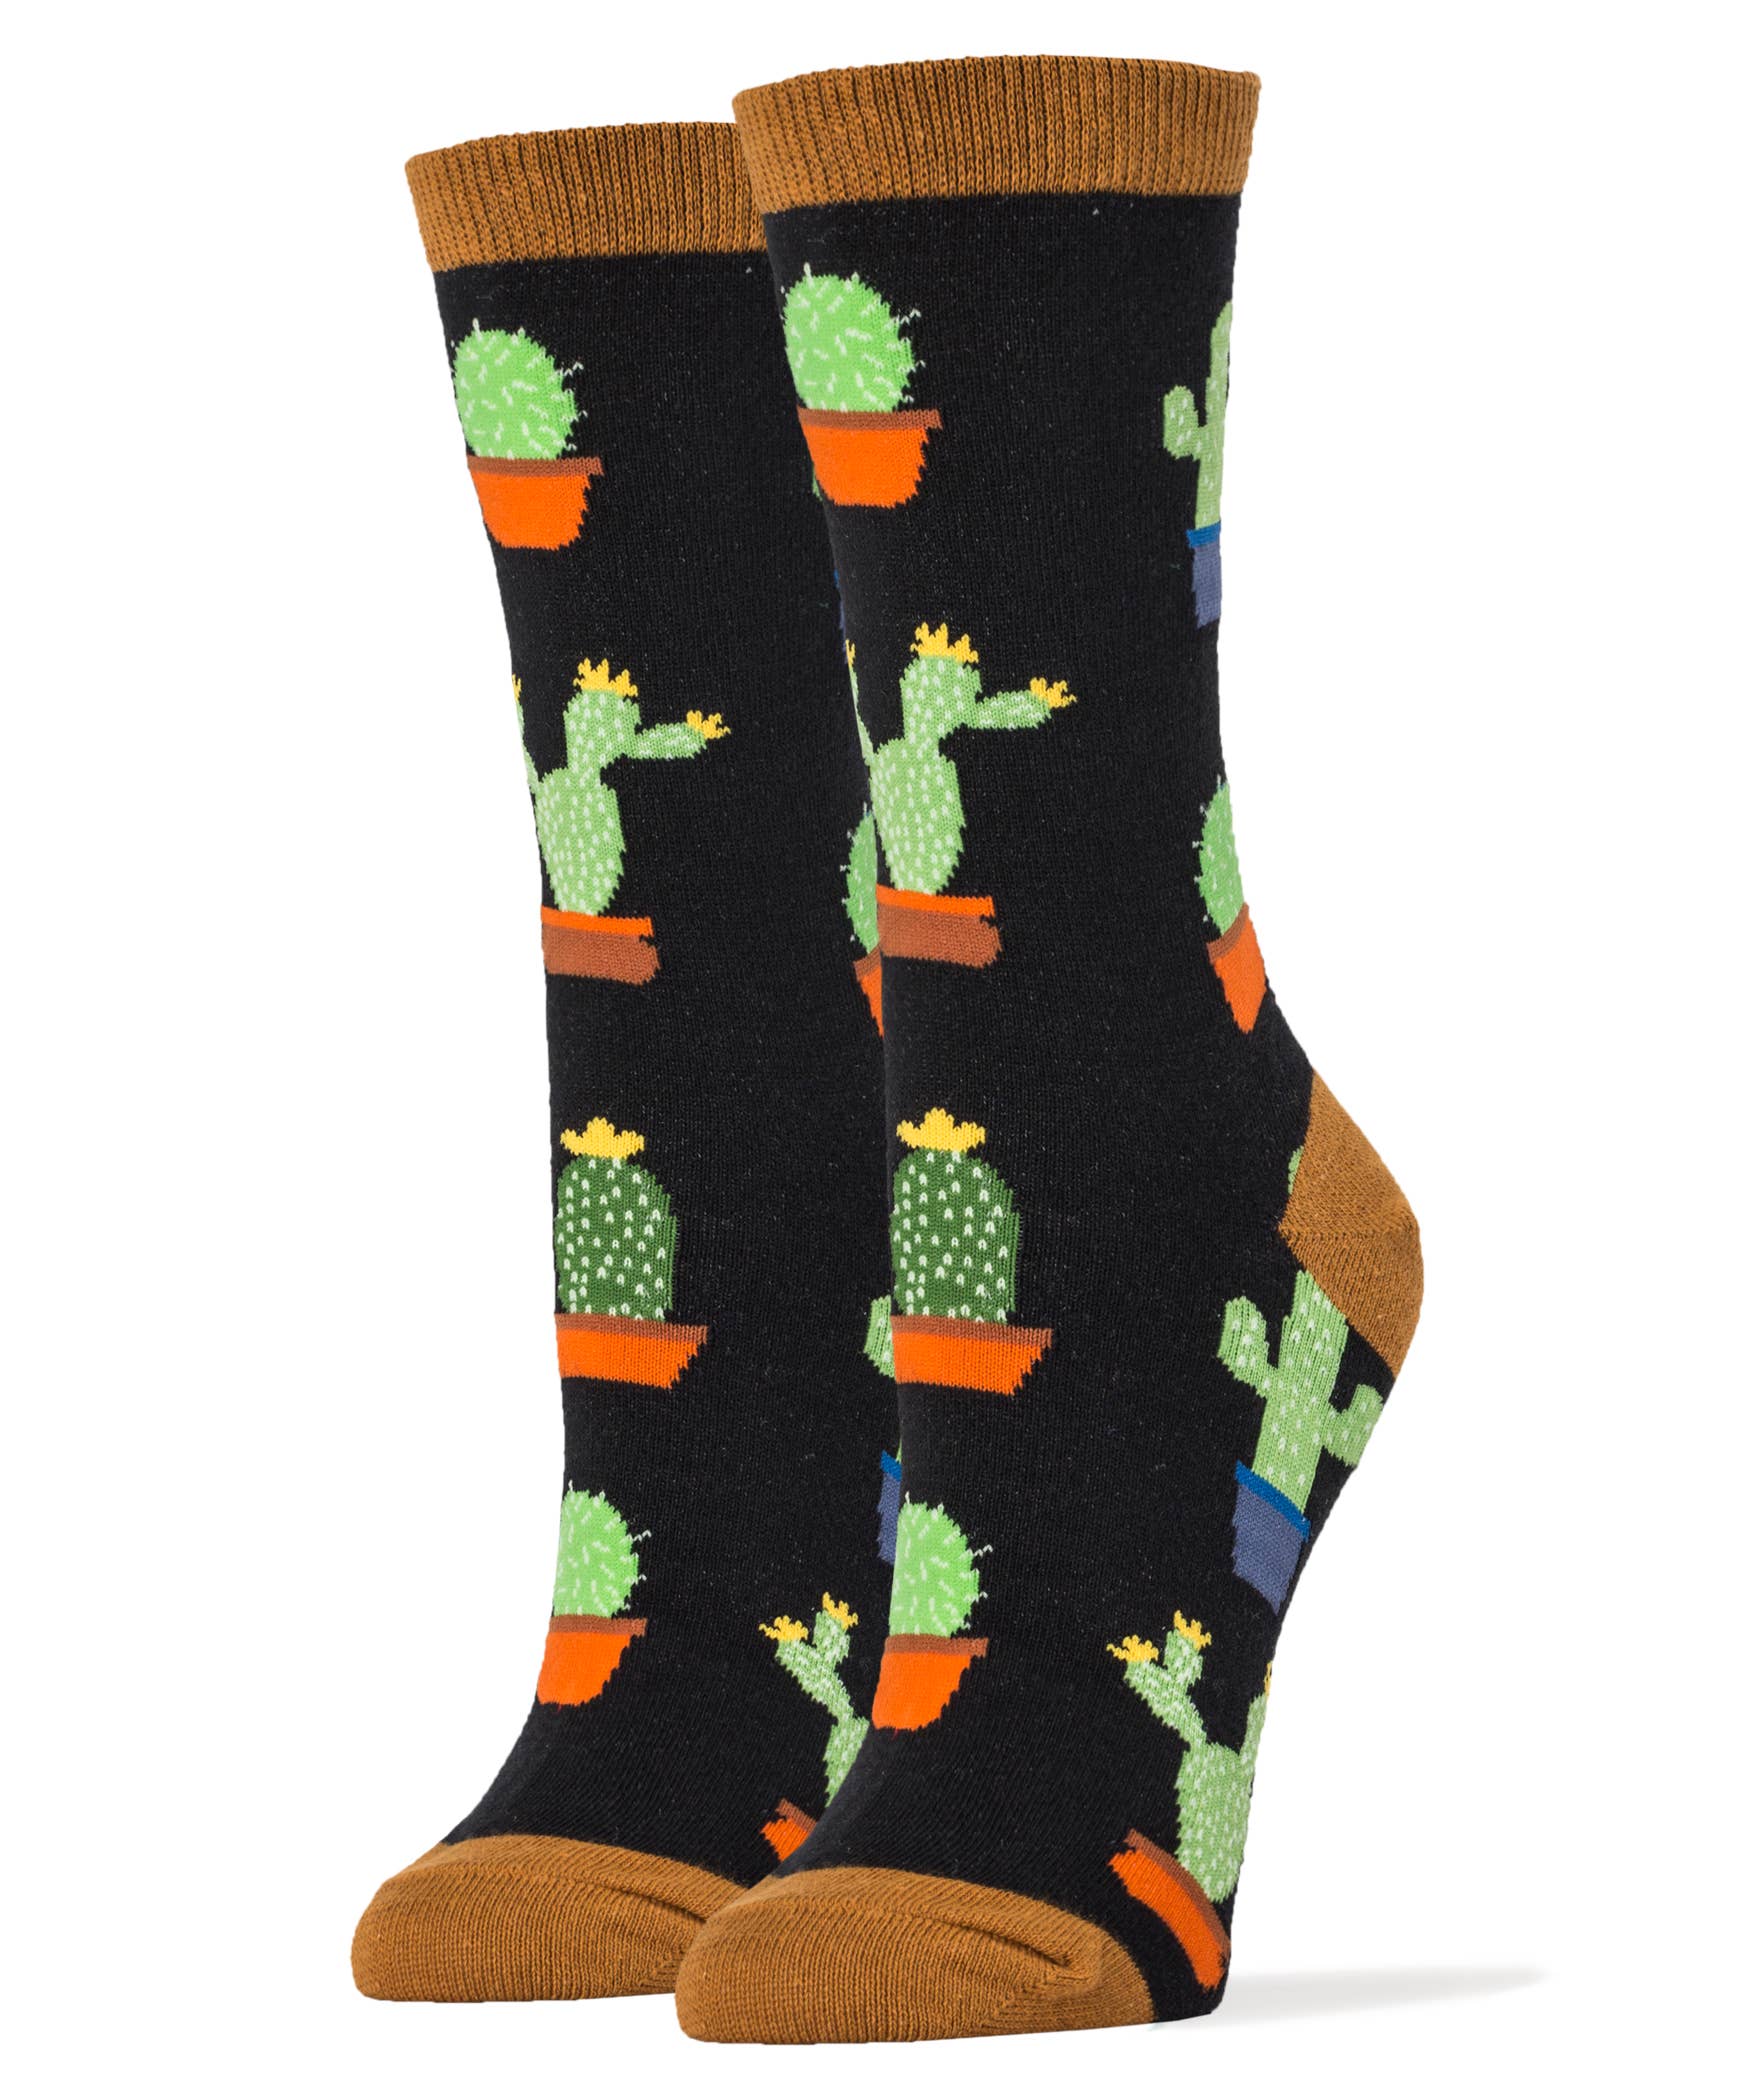 Other Goodies Into the Desert | Women's Cotton Crew Funny Socks